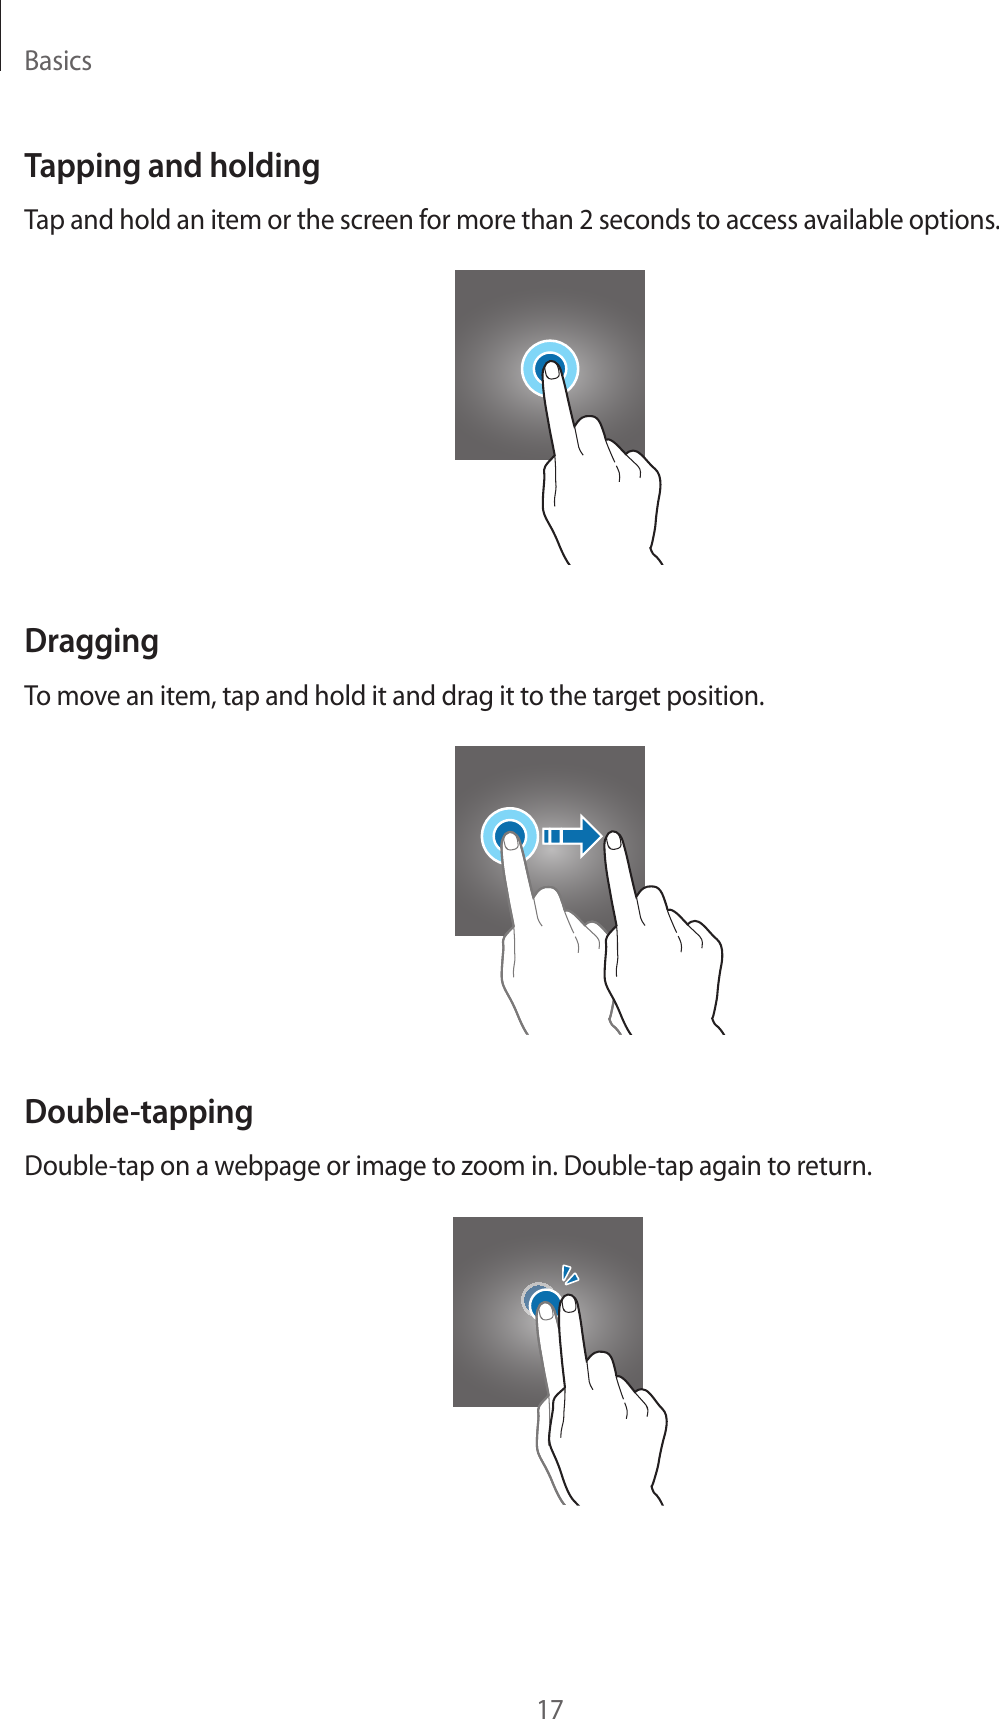 Basics17Tapping and holdingTap and hold an item or the screen f or mor e than 2 sec onds to ac cess a v ailable options .DraggingTo move an it em, tap and hold it and dr ag it to the tar get position.Double-tappingDouble-tap on a webpage or image to zoom in. Double-tap again to return.